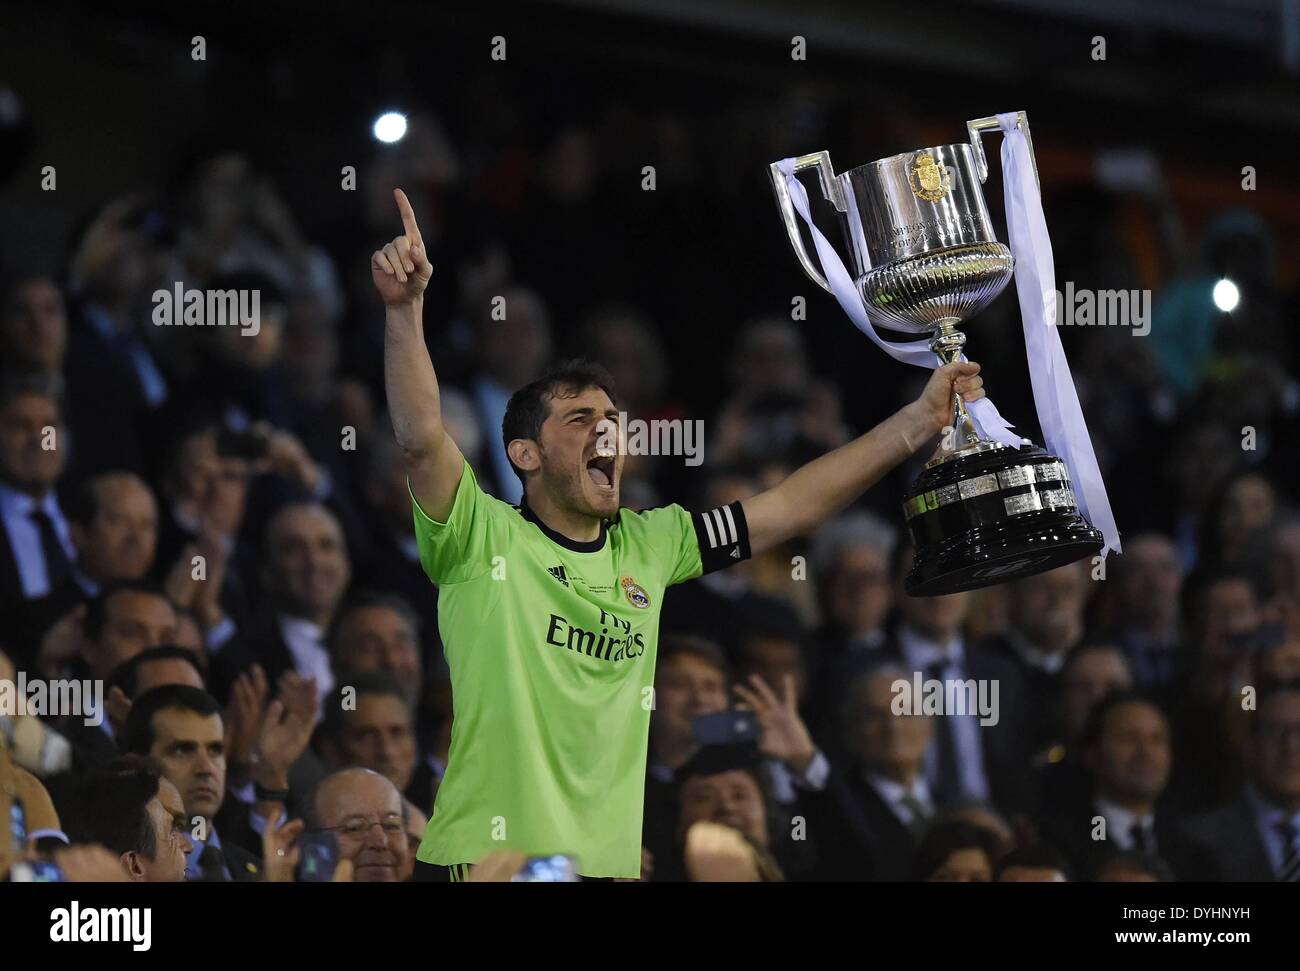 Mestalla, Valencia, Spain. 16th Apr, 2014. Copa Del Rey Cup final. Barcelona versus Real Madrid. Iker Casillas (Real Madrid) celebrates with the cup © Action Plus Sports/Alamy Live News Stock Photo